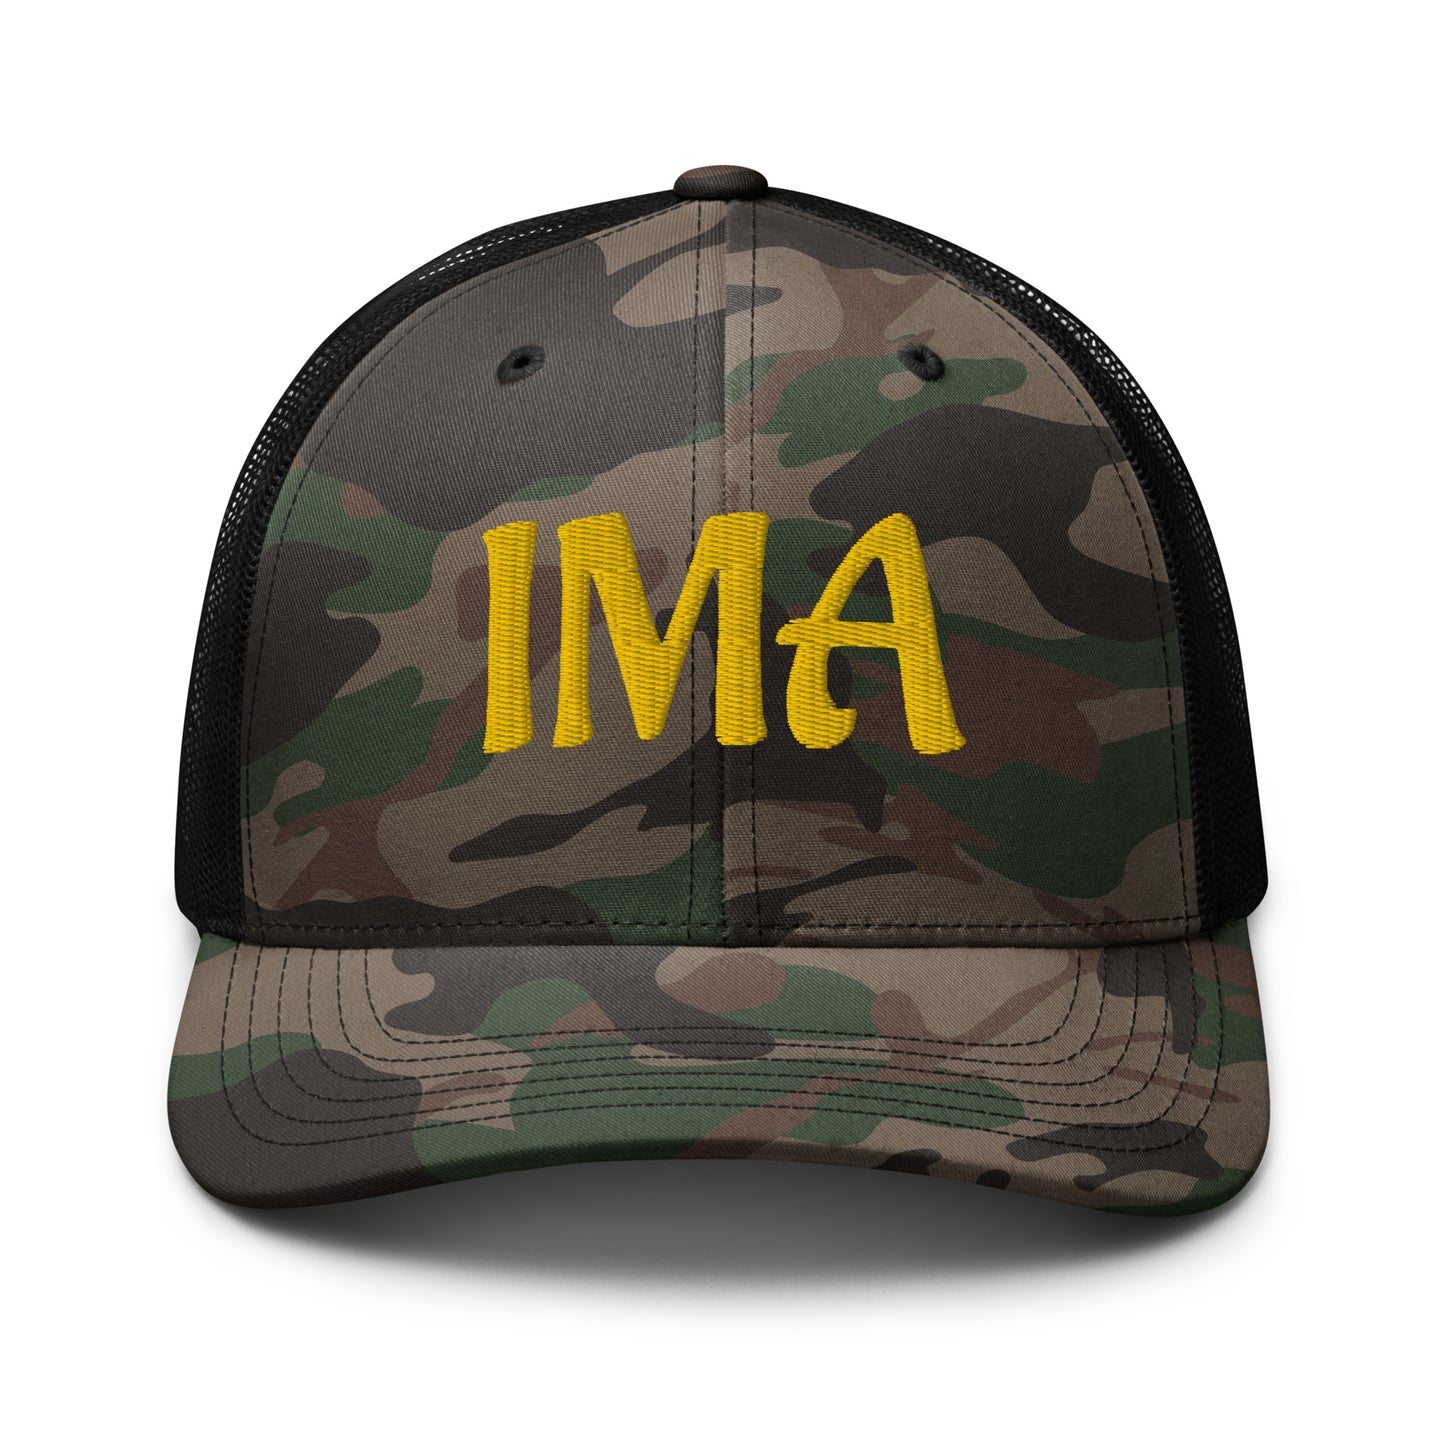 "The Camouflage" Trucker Hat